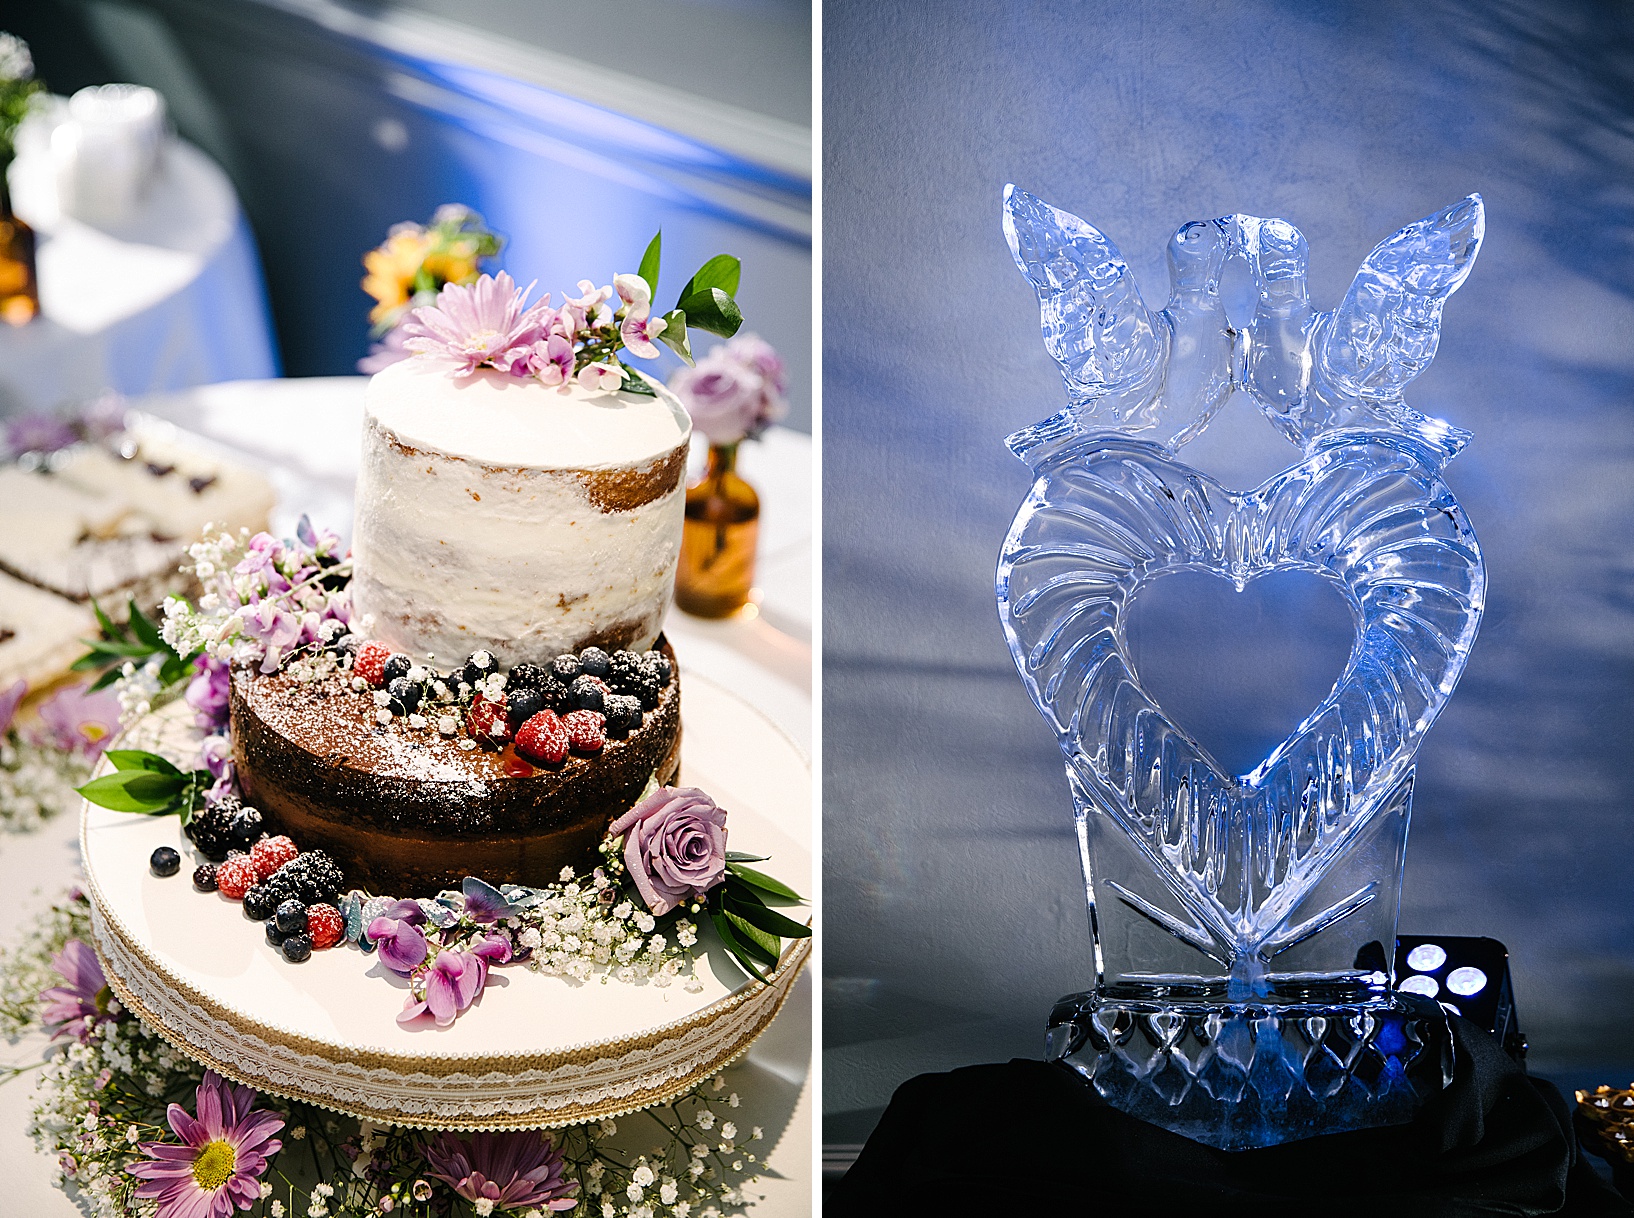 An wedding ice sculpture of two doves kissing on top of a large heart